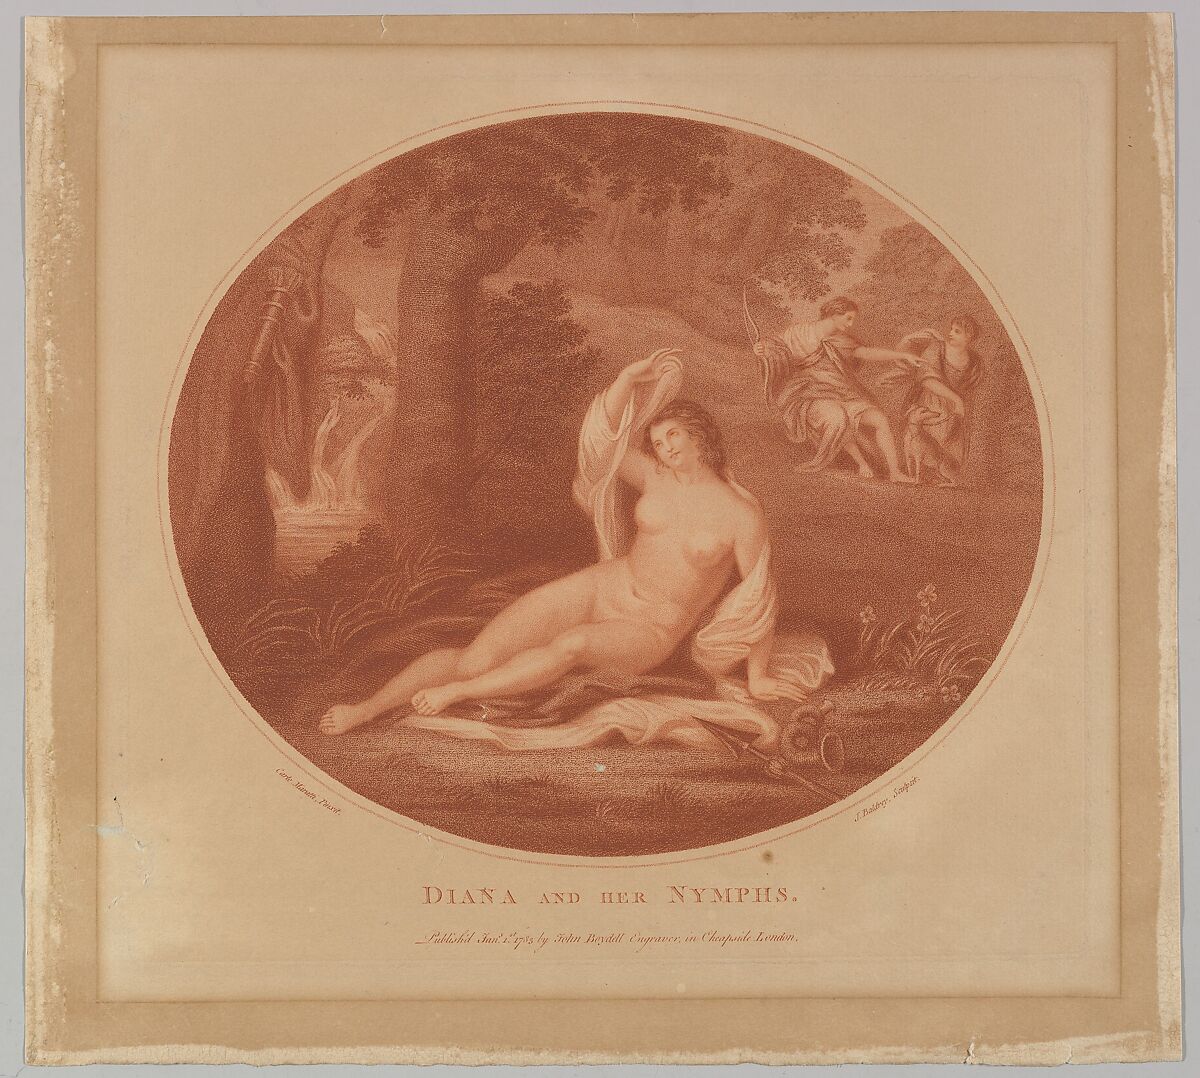 Diana and her Nymphs, John Baldrey (British, 1758–after 1792), Stipple engraving, printed in red ink 